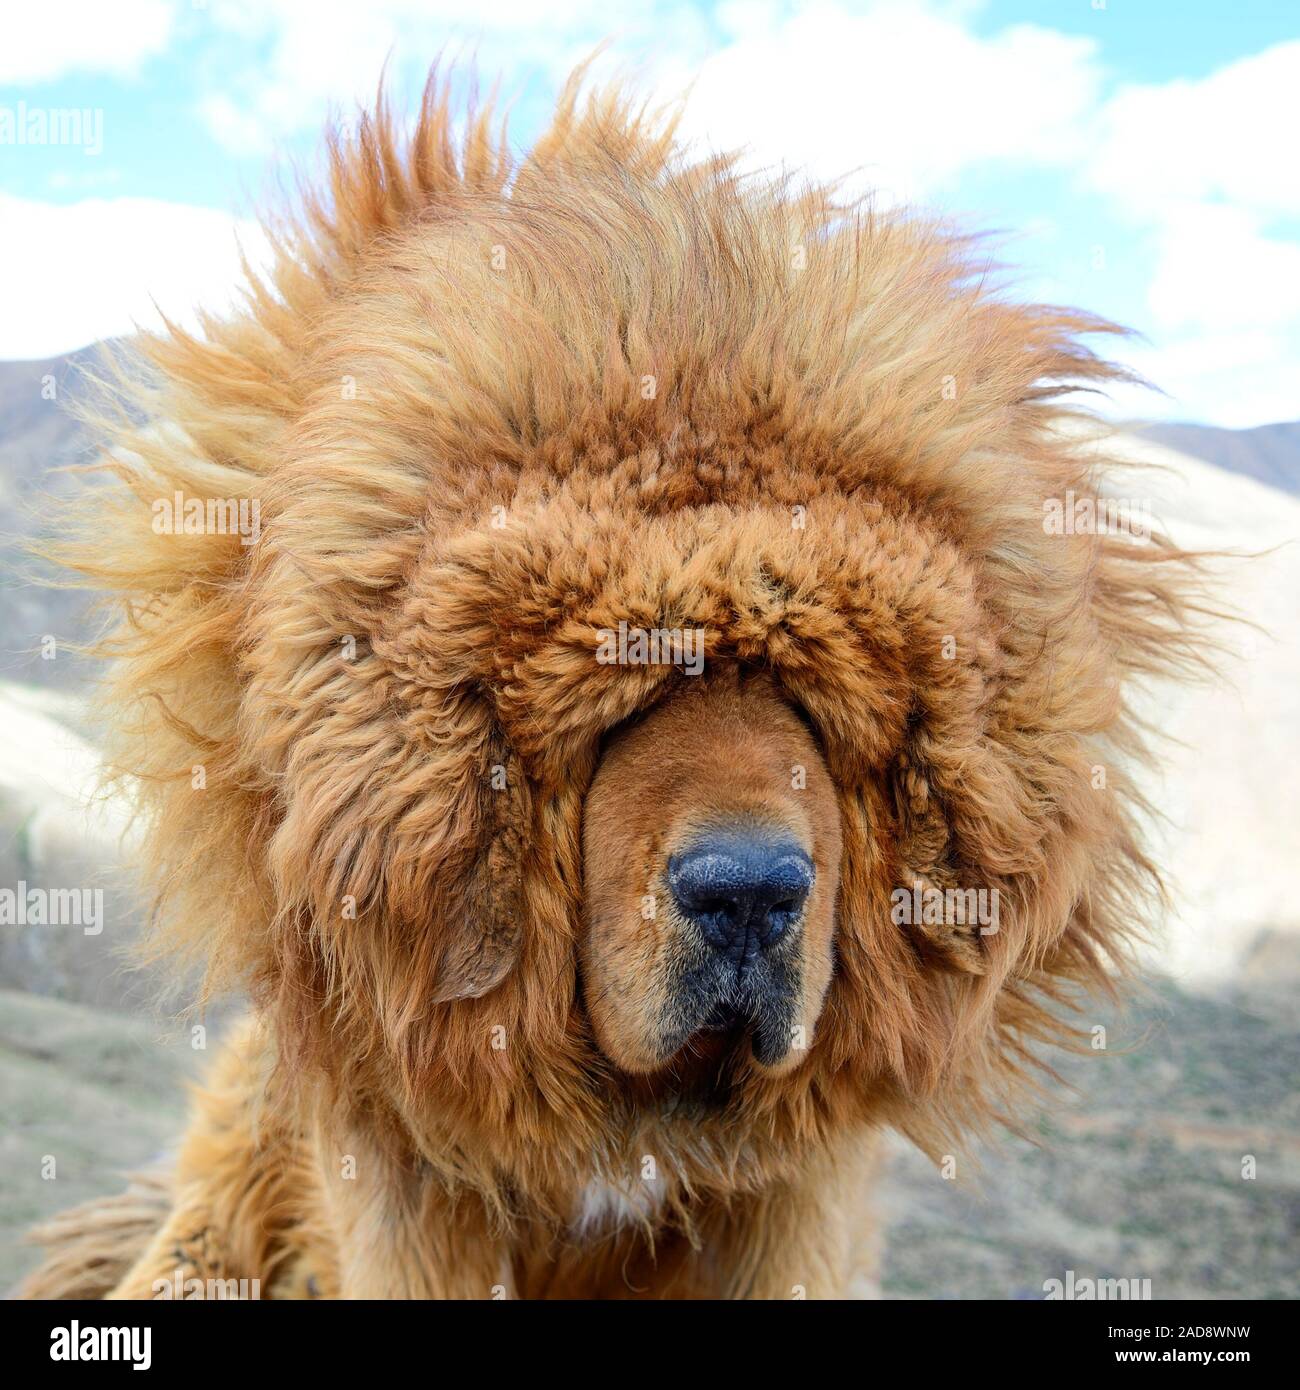 The Lion Like Mane Of A Tibetan Mastiff Blows Wildly In The Windy Climate Of Tibet Autonomous Region In China Stock Photo Alamy